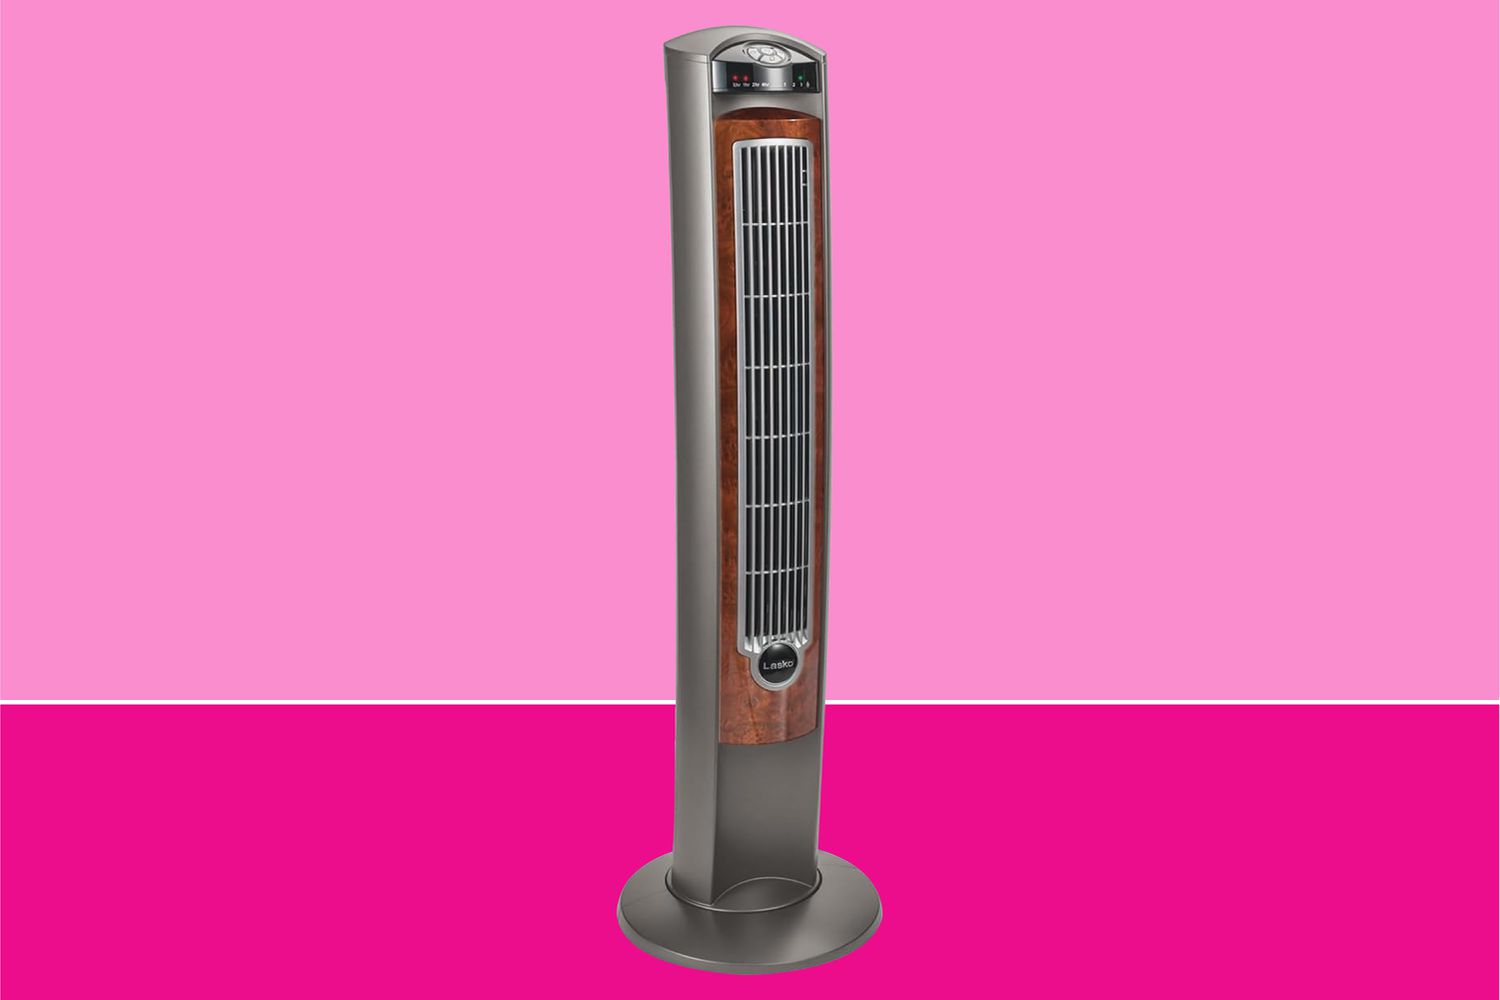 This Lasko Tower Fan Kept My Family Cool During 100-Degree